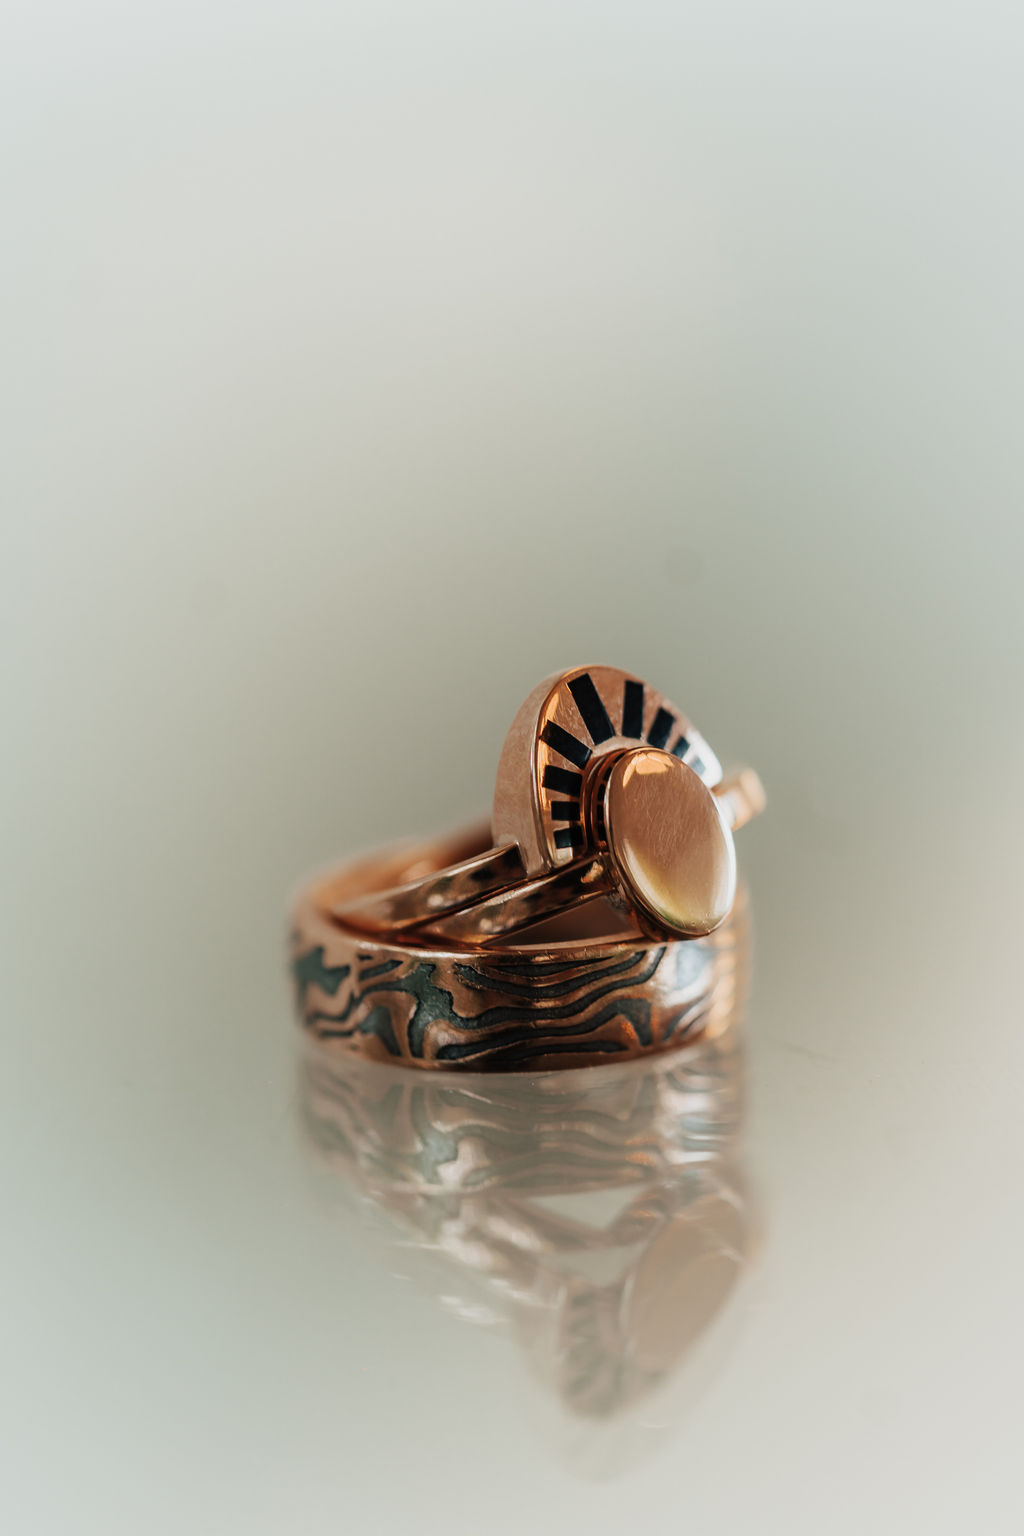 Closeup photo of the copper ring made from the Statue of Liberty.